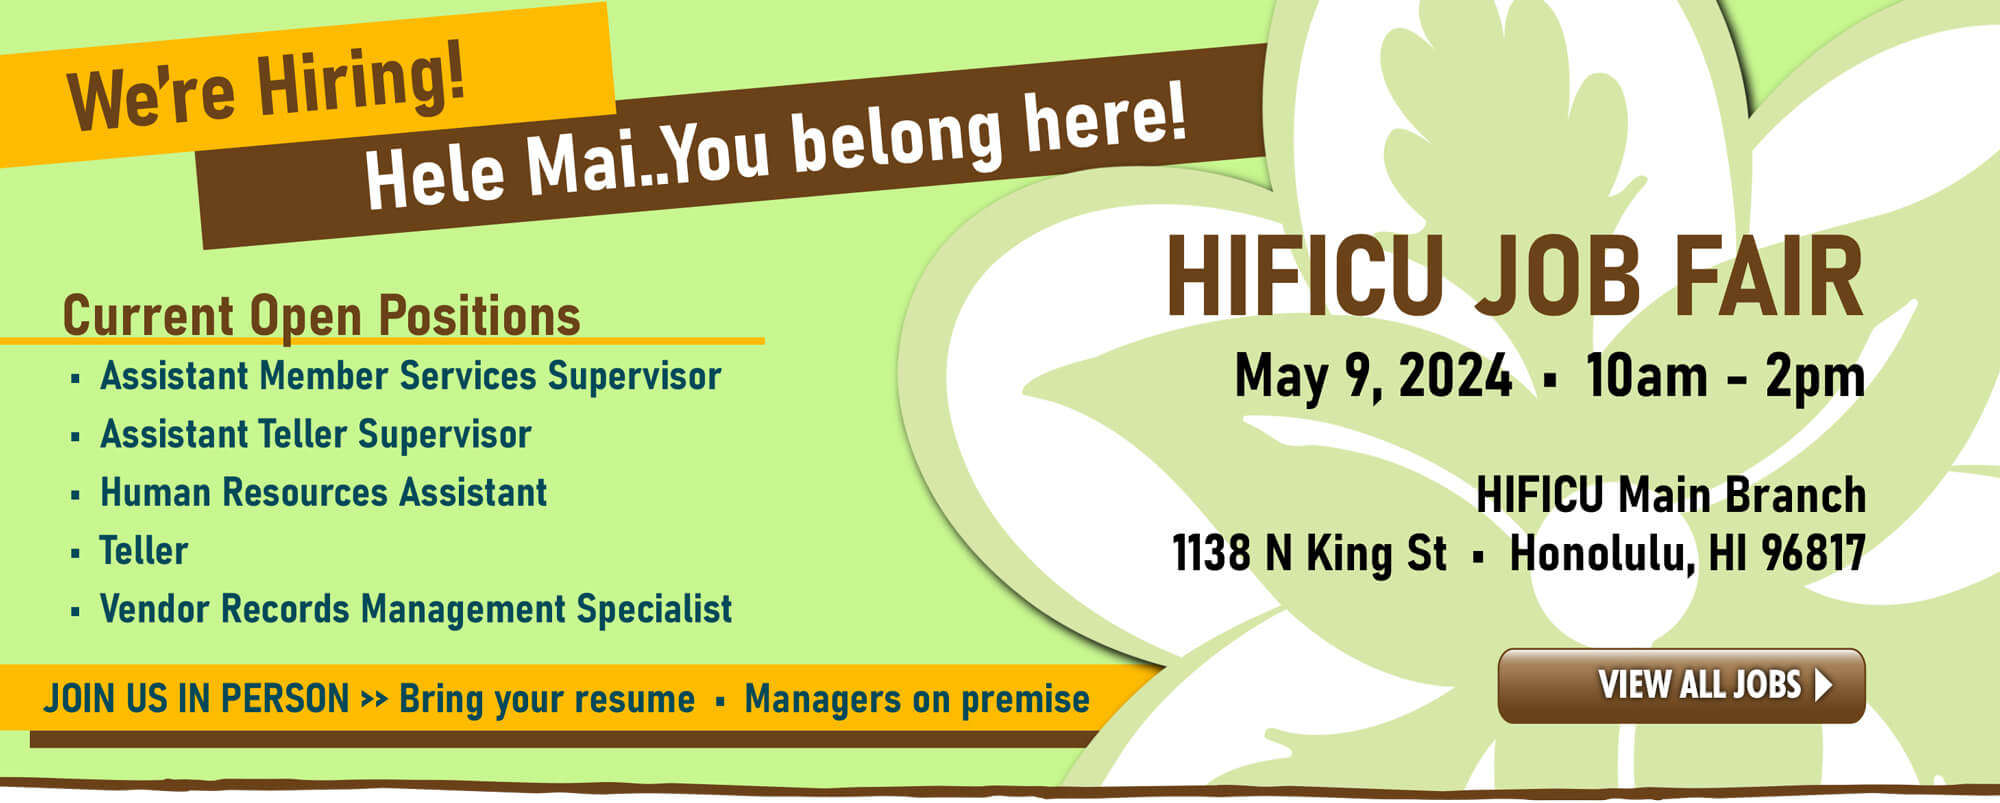 We're hiring!  HIFICU will be holding a Job Fair at our main branch on Thursday, May 9, from 10am-2pm.  Hele mai..you belong here!